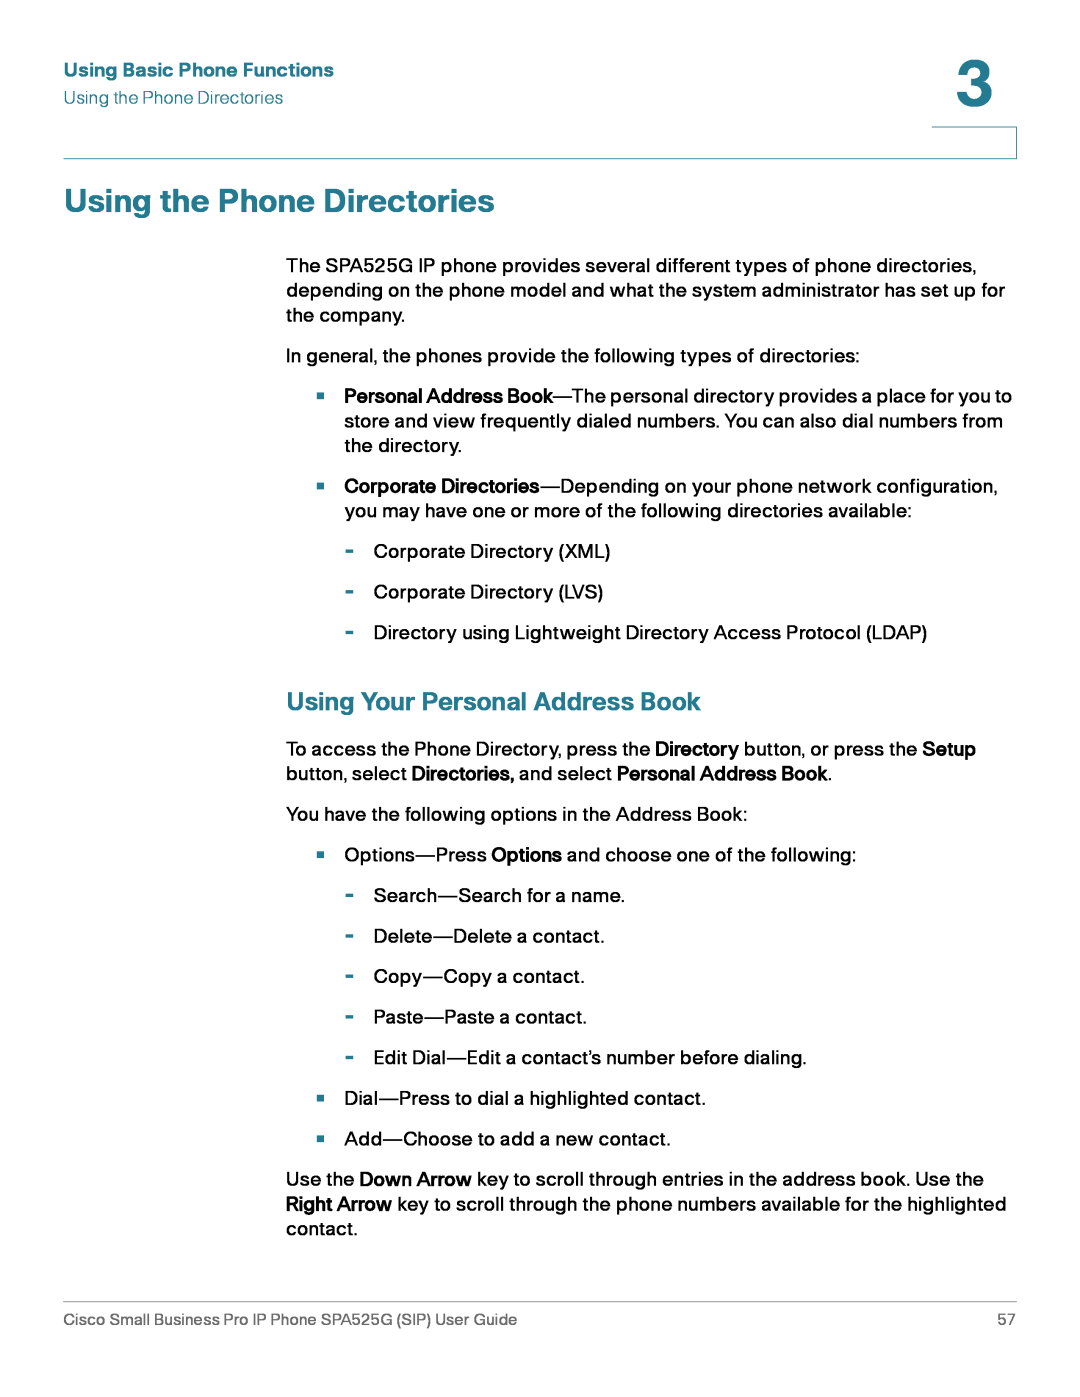 Cisco Systems SPA525G manual Using the Phone Directories, Using Your Personal Address Book, Using Basic Phone Functions 